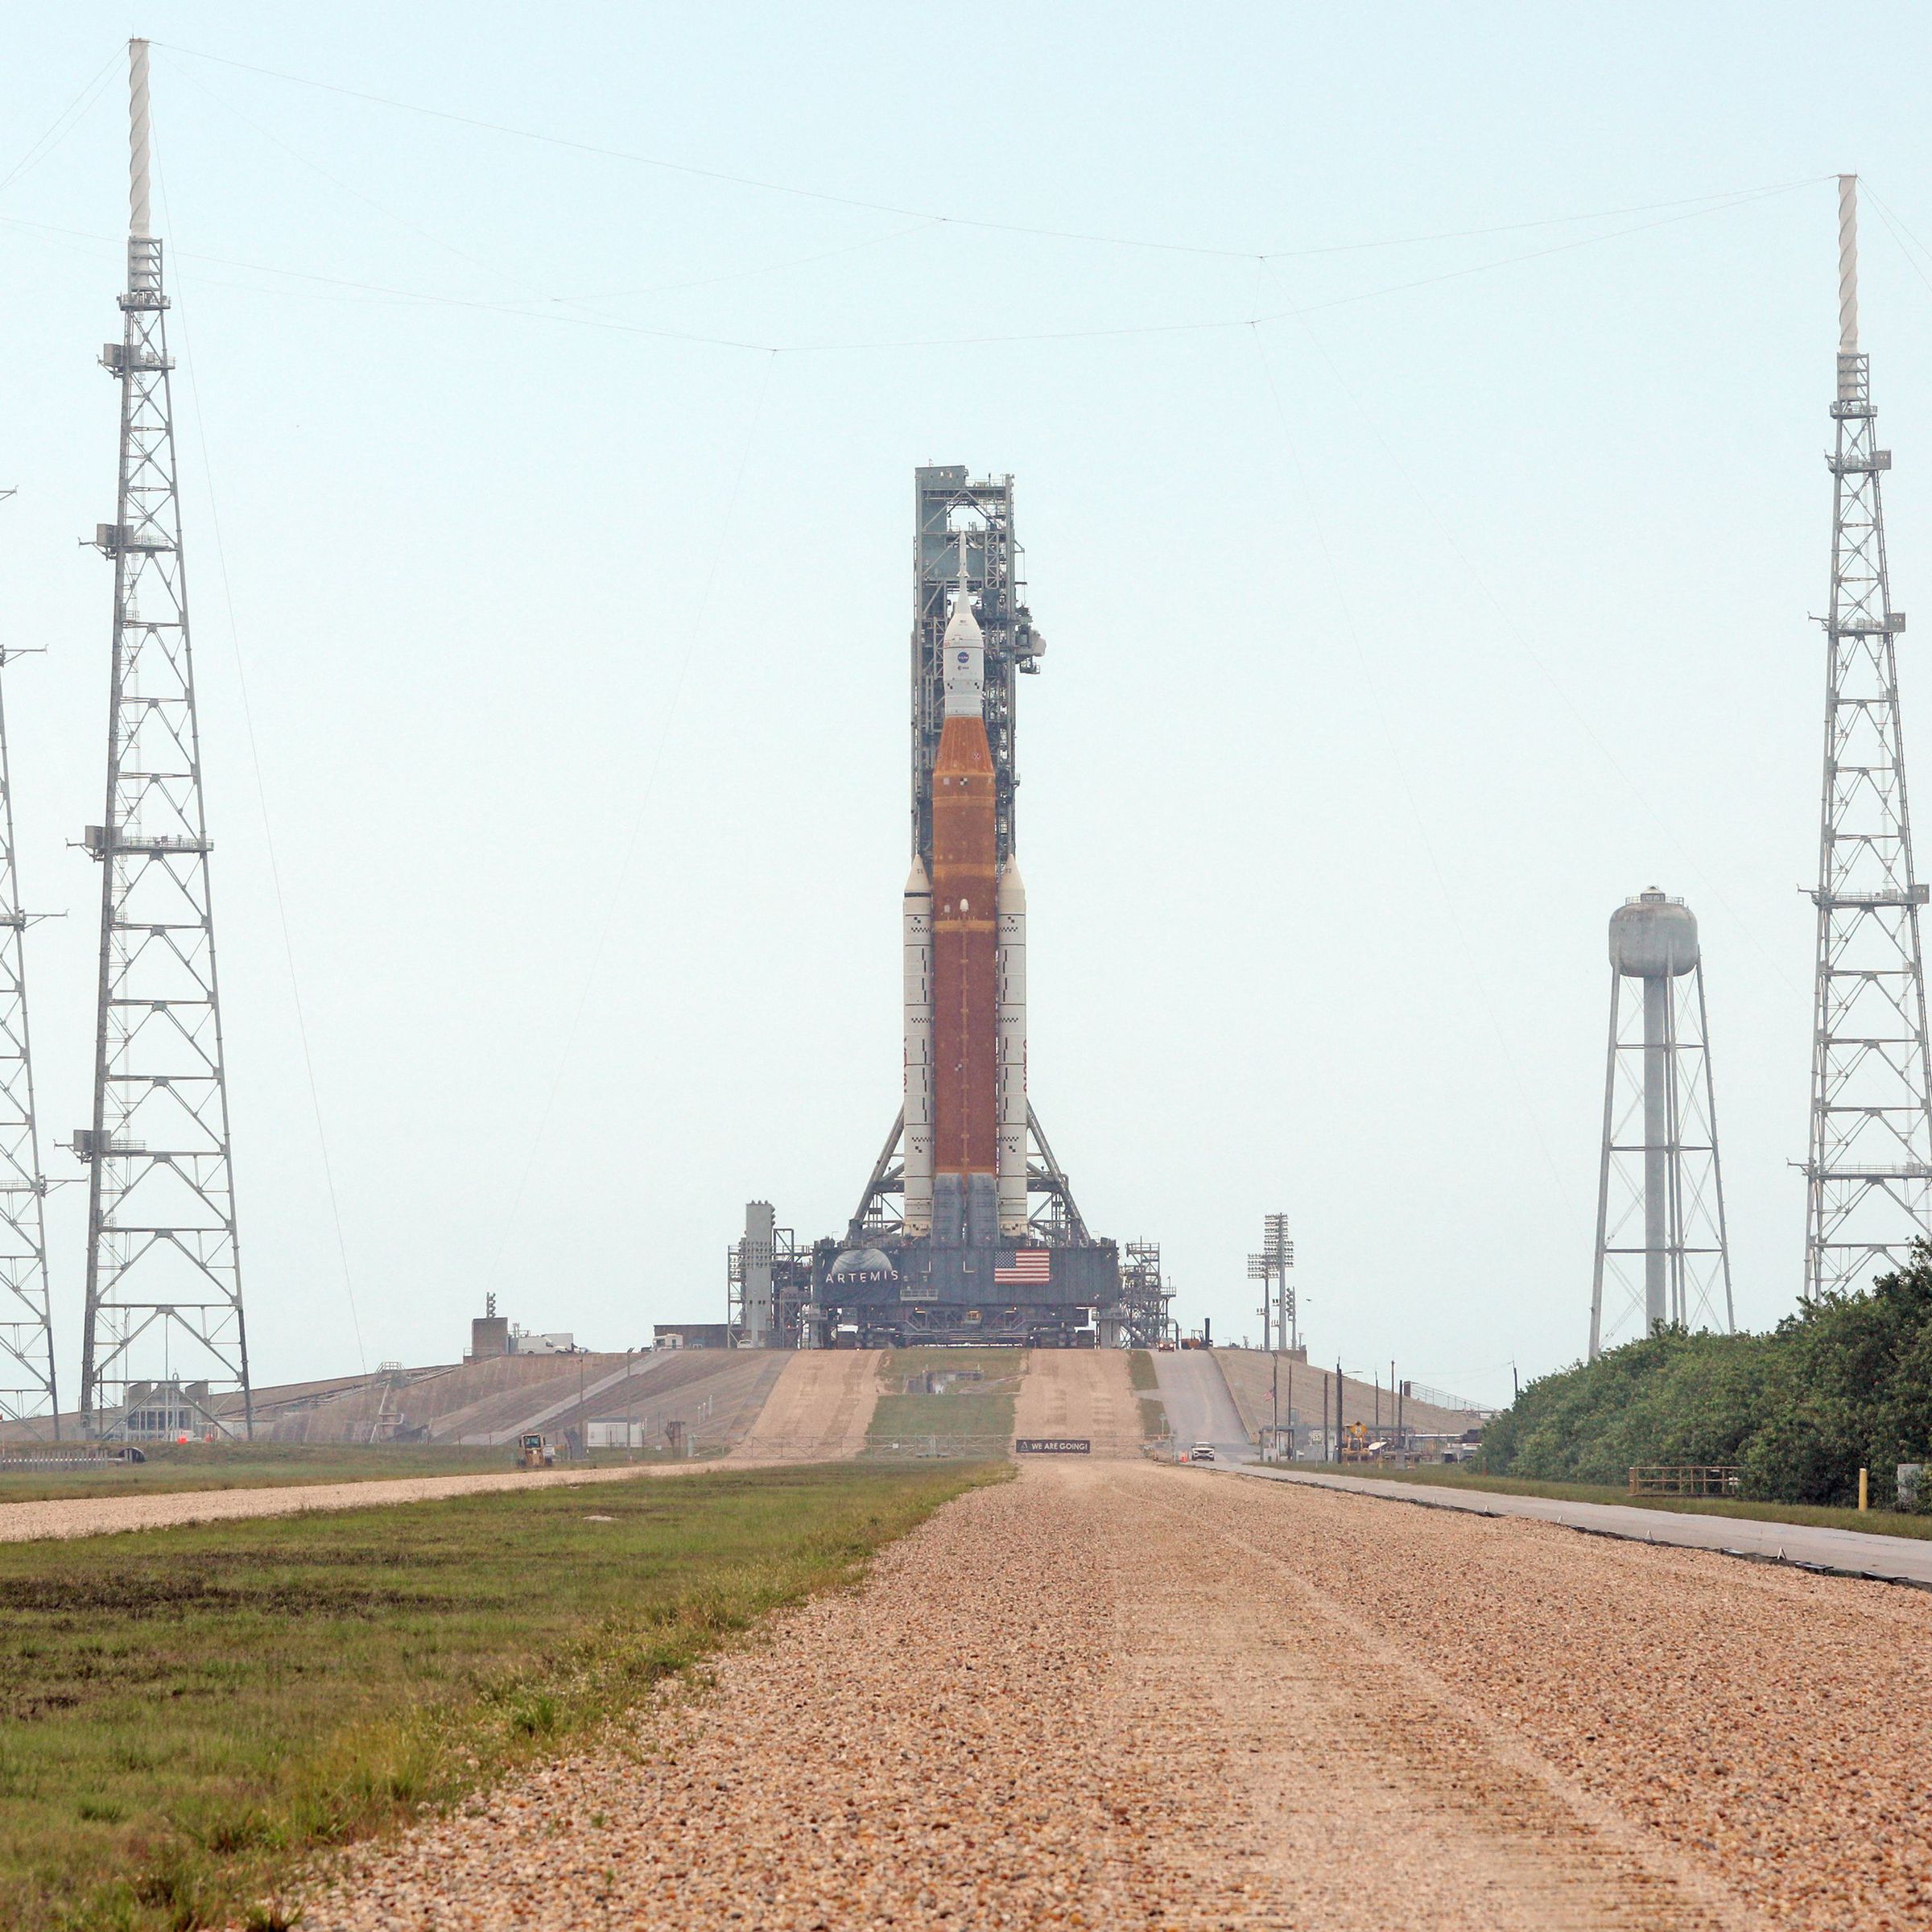 A rocket sits on the launchpad at the end of a dirt road.